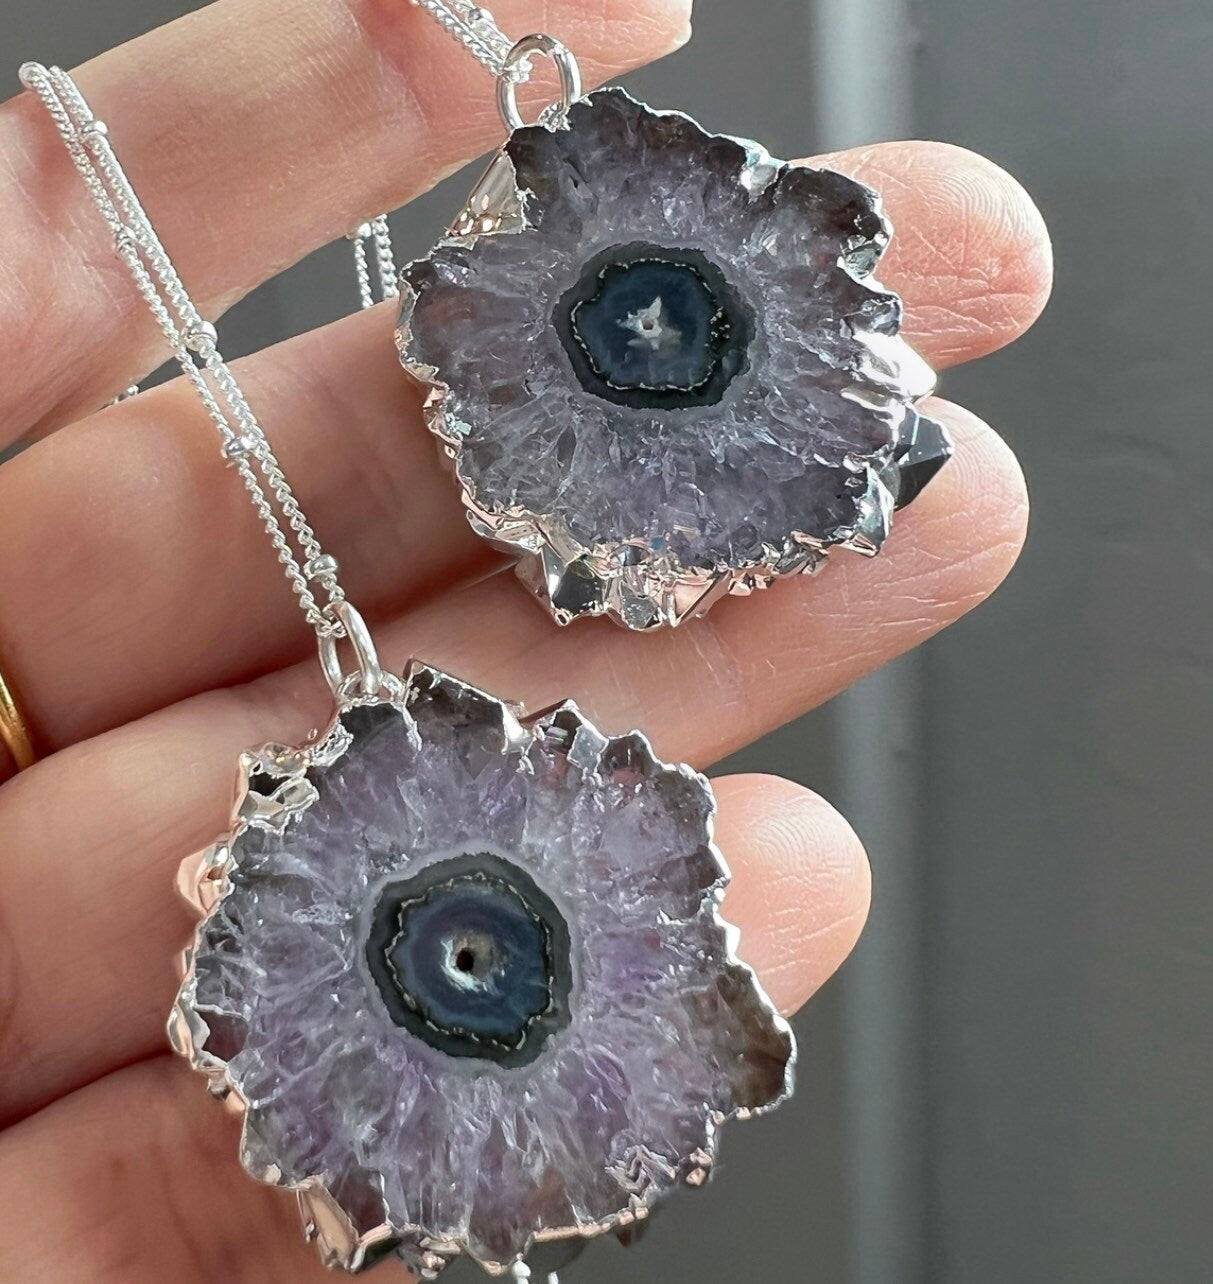 Amethyst Stalactite Necklace, Raw Amethyst Stalactite Slice Necklace, Natural Amethyst Pendant, One of a Kind Crystal Pendant